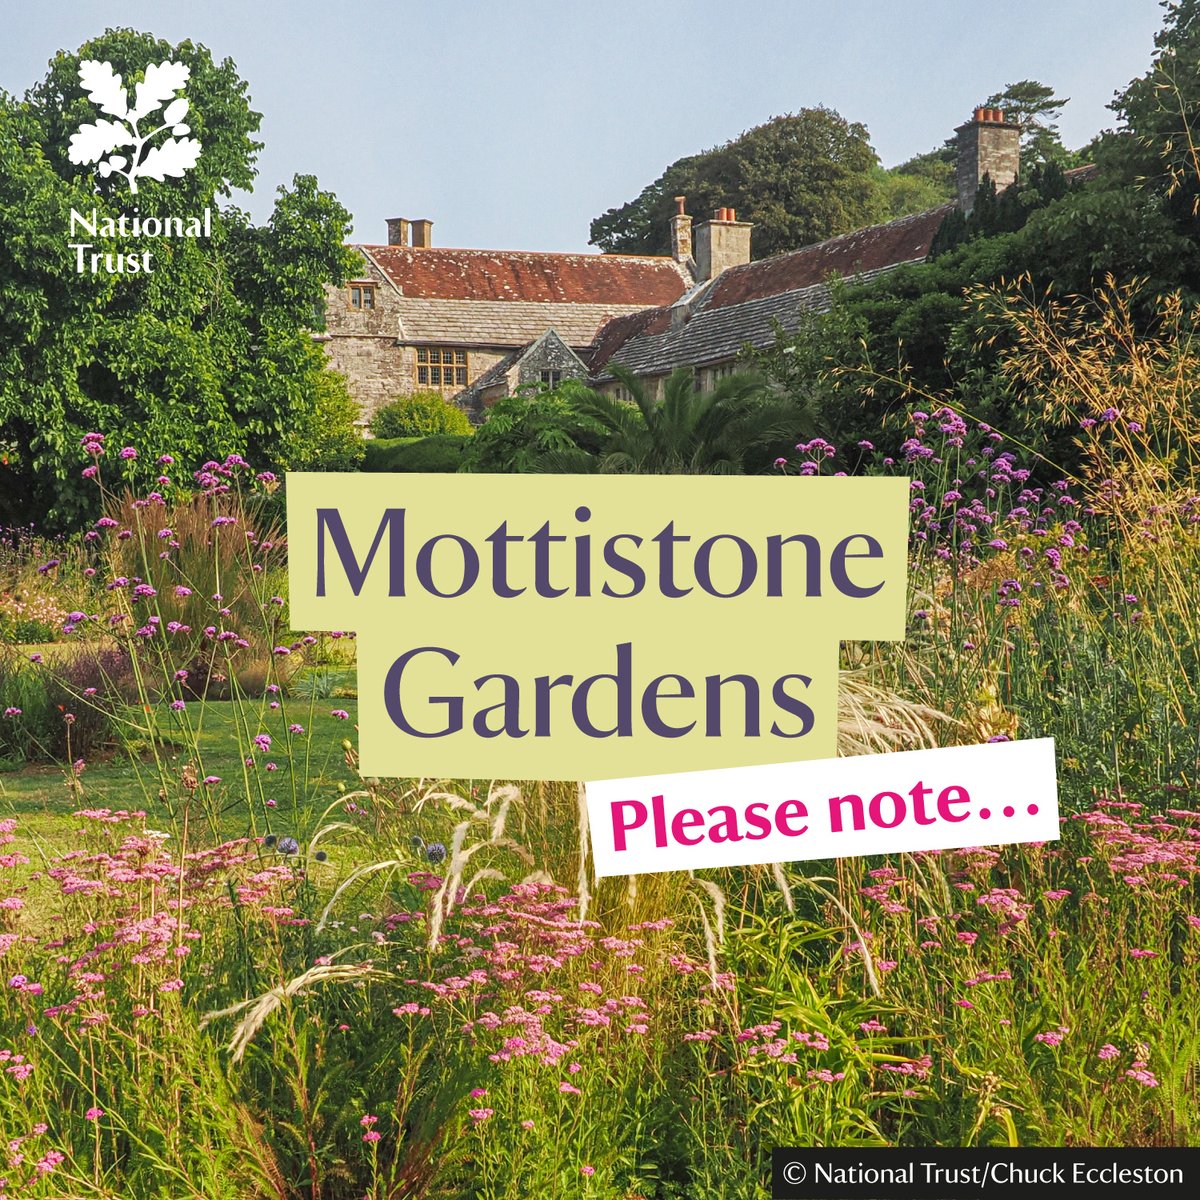 Planning to visit #MottistoneGardens tomorrow (9 May)? Please be aware that we'll be closing early at 2pm. This is so that we can improve our visitor facilities, meaning your next visit will be even more enjoyable. Sorry for any inconvenience but thank you for understanding.